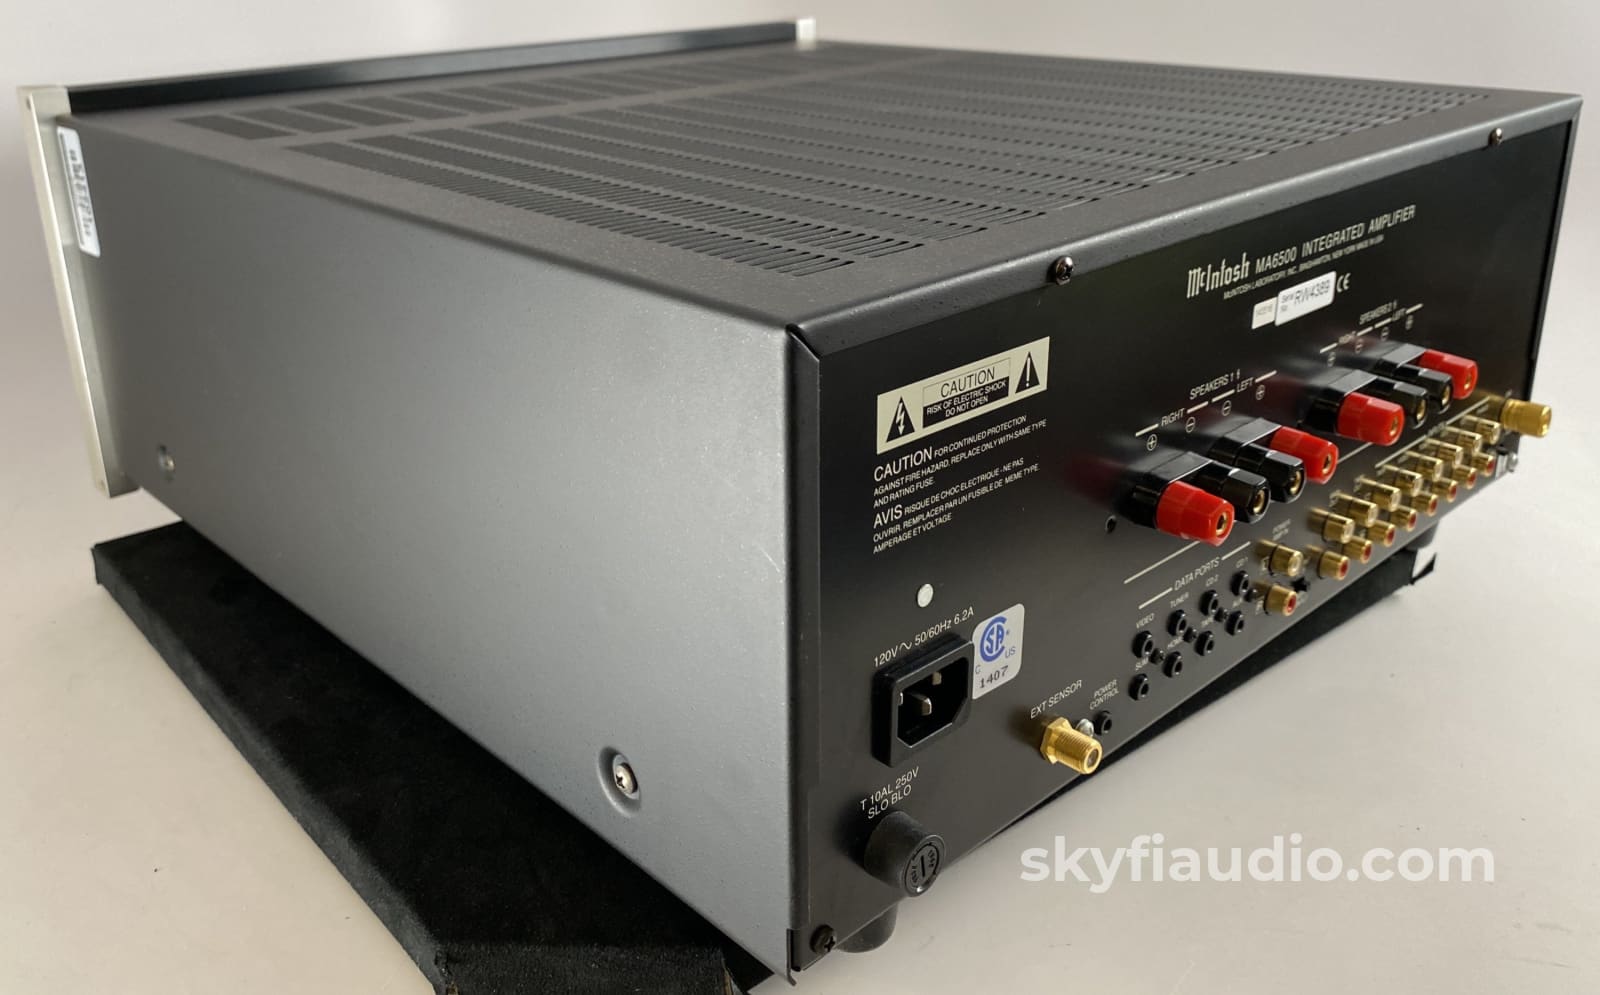 Mcintosh Ma6500 Integrated Amplifier - Excellent Condition And Refreshed